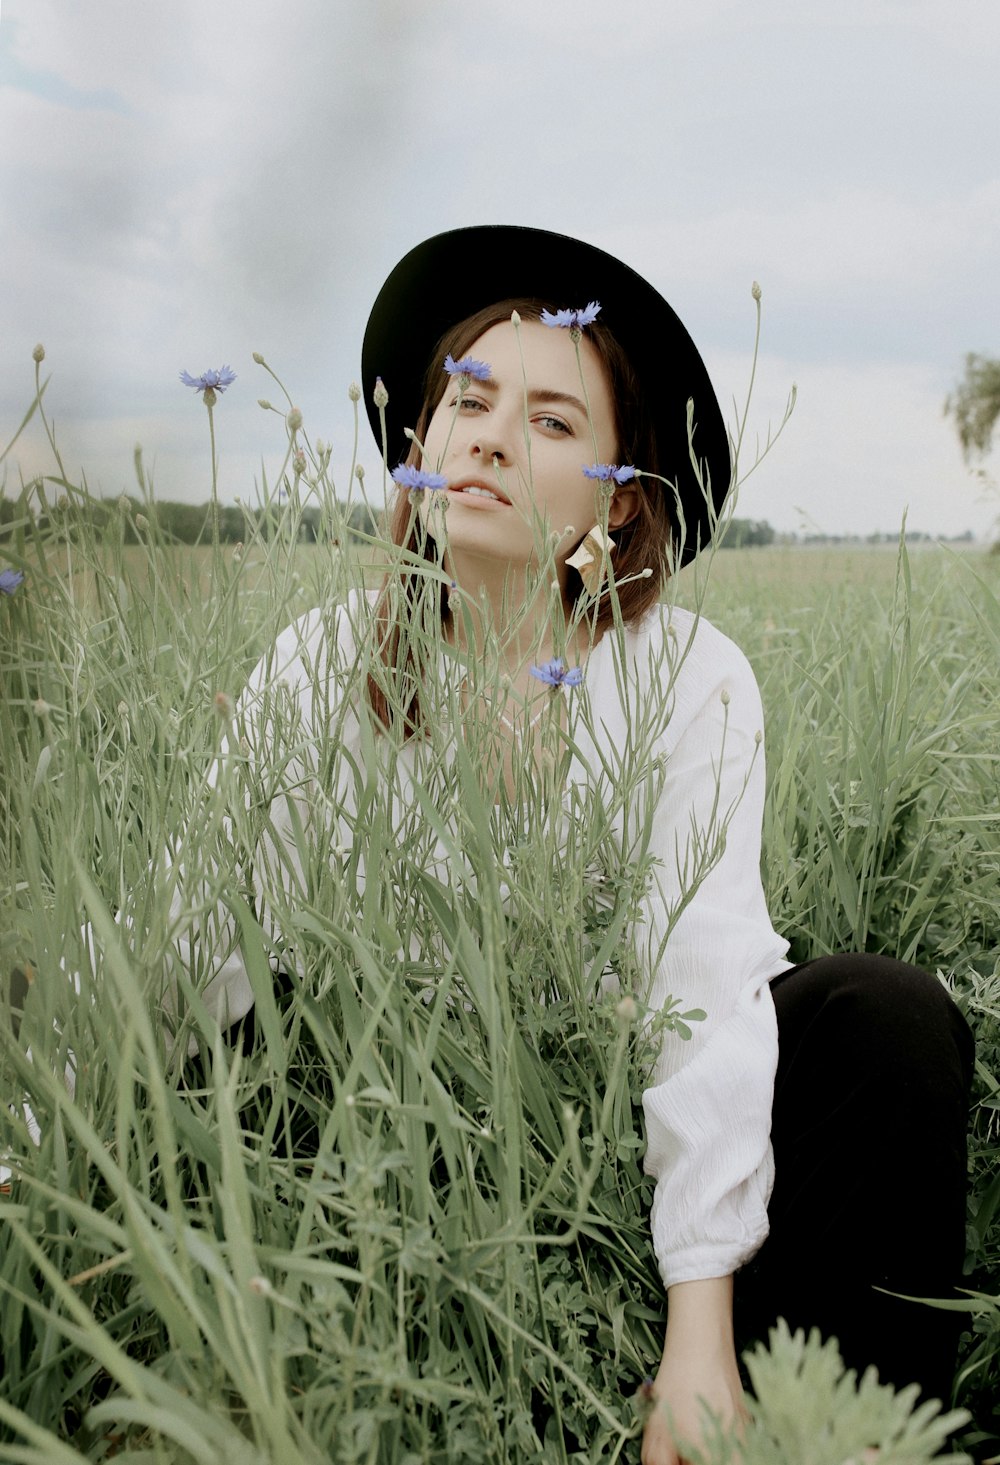 woman in black hat and white long-sleeved top near plants